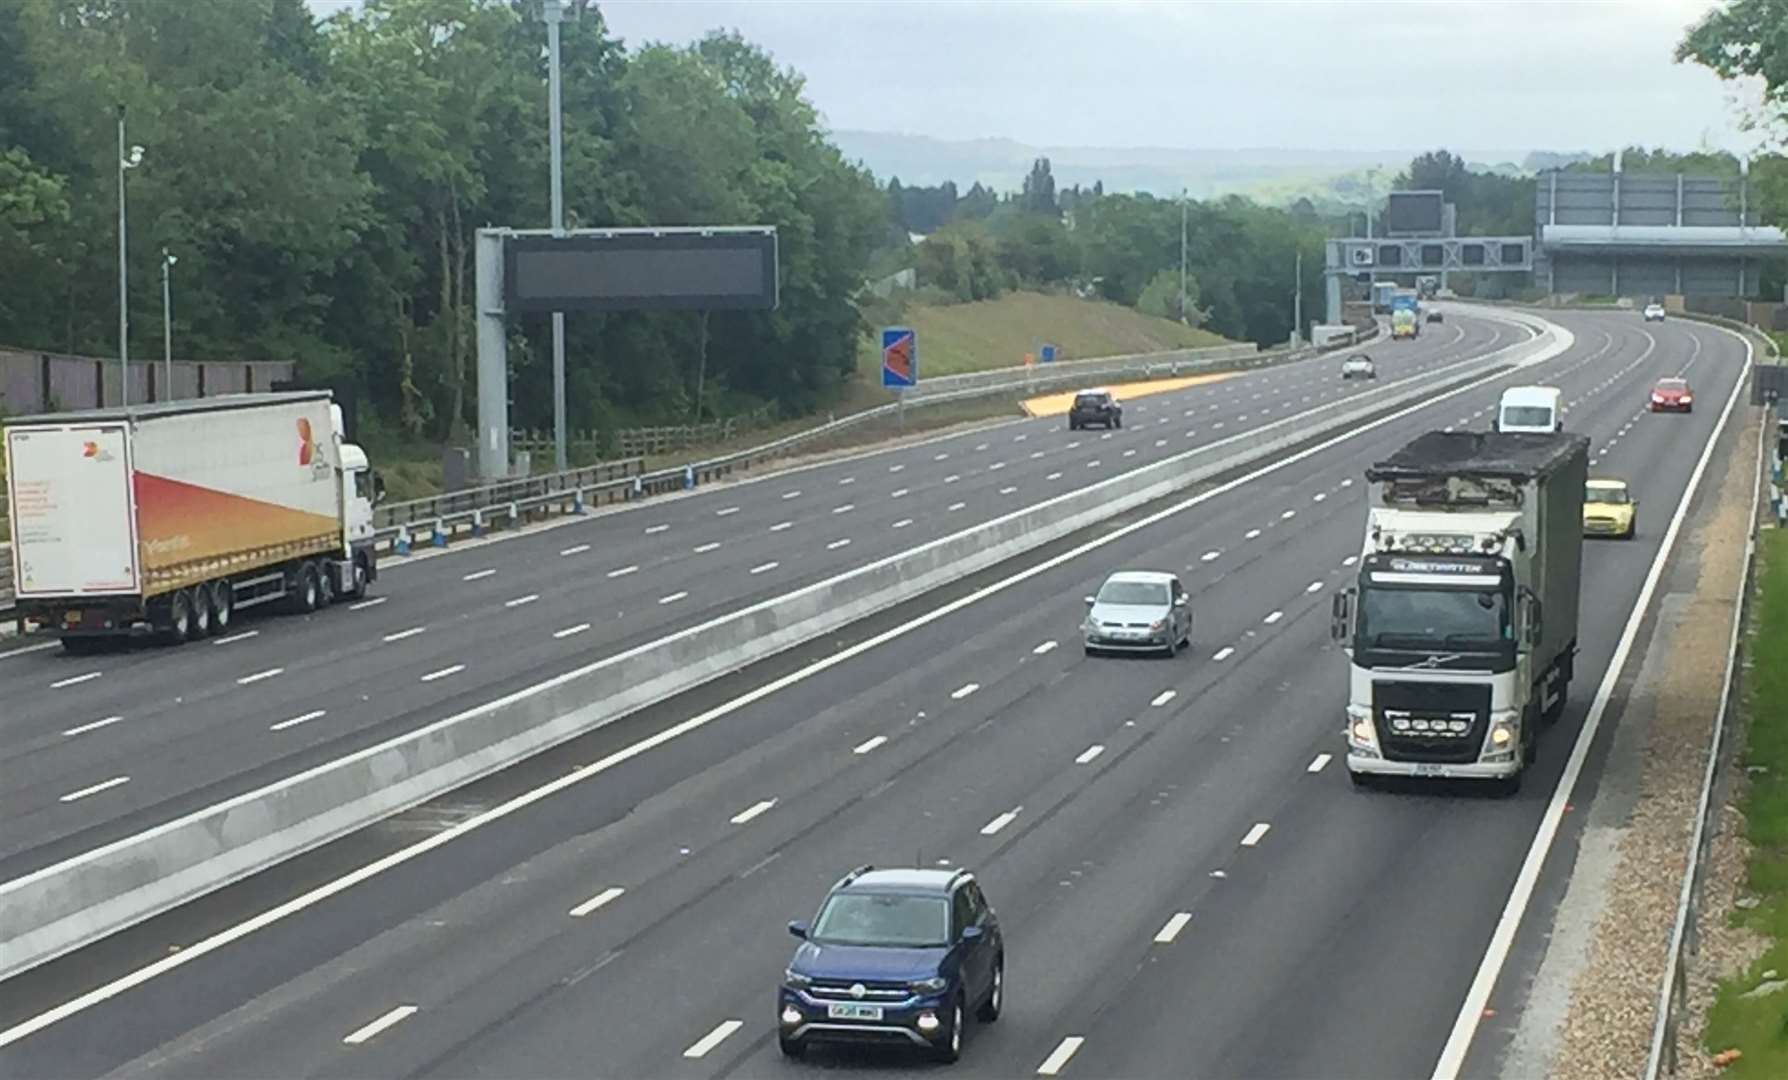 A stretch of the M20 smart motorway which was completed in May 2020